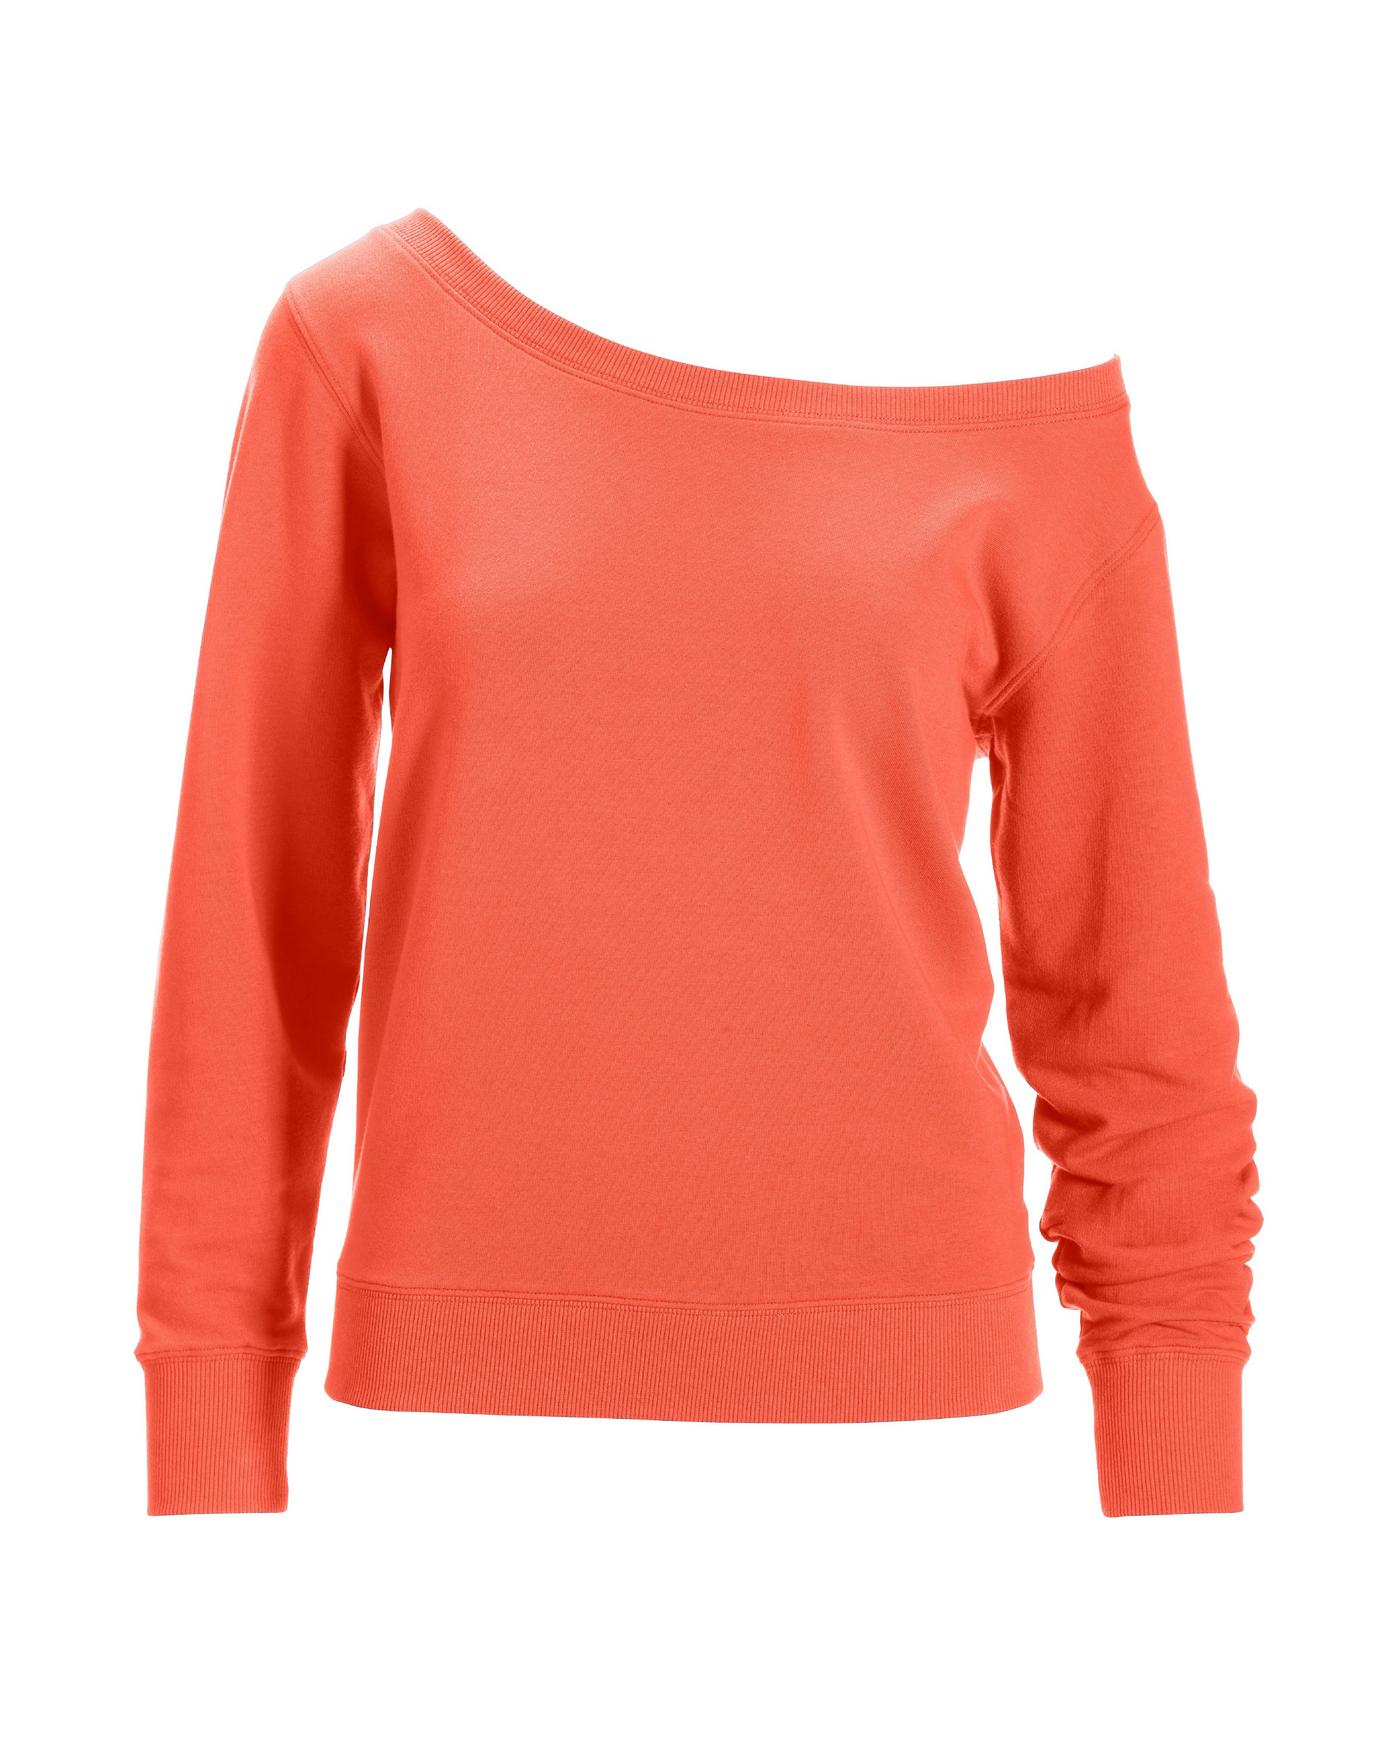 Slouchy French Terry Pullover Proper | Hot Boston Coral - Orange Sweatshirt